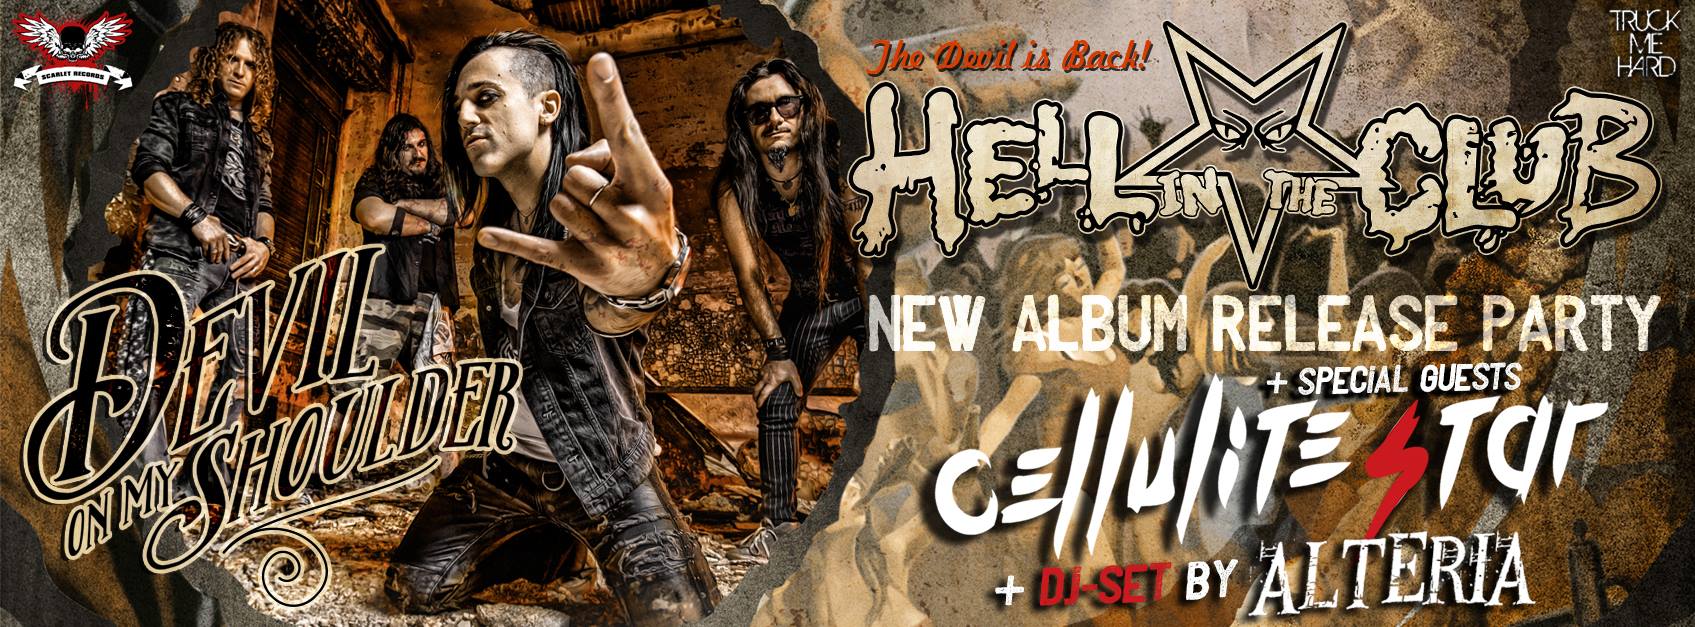 hell in the club release party